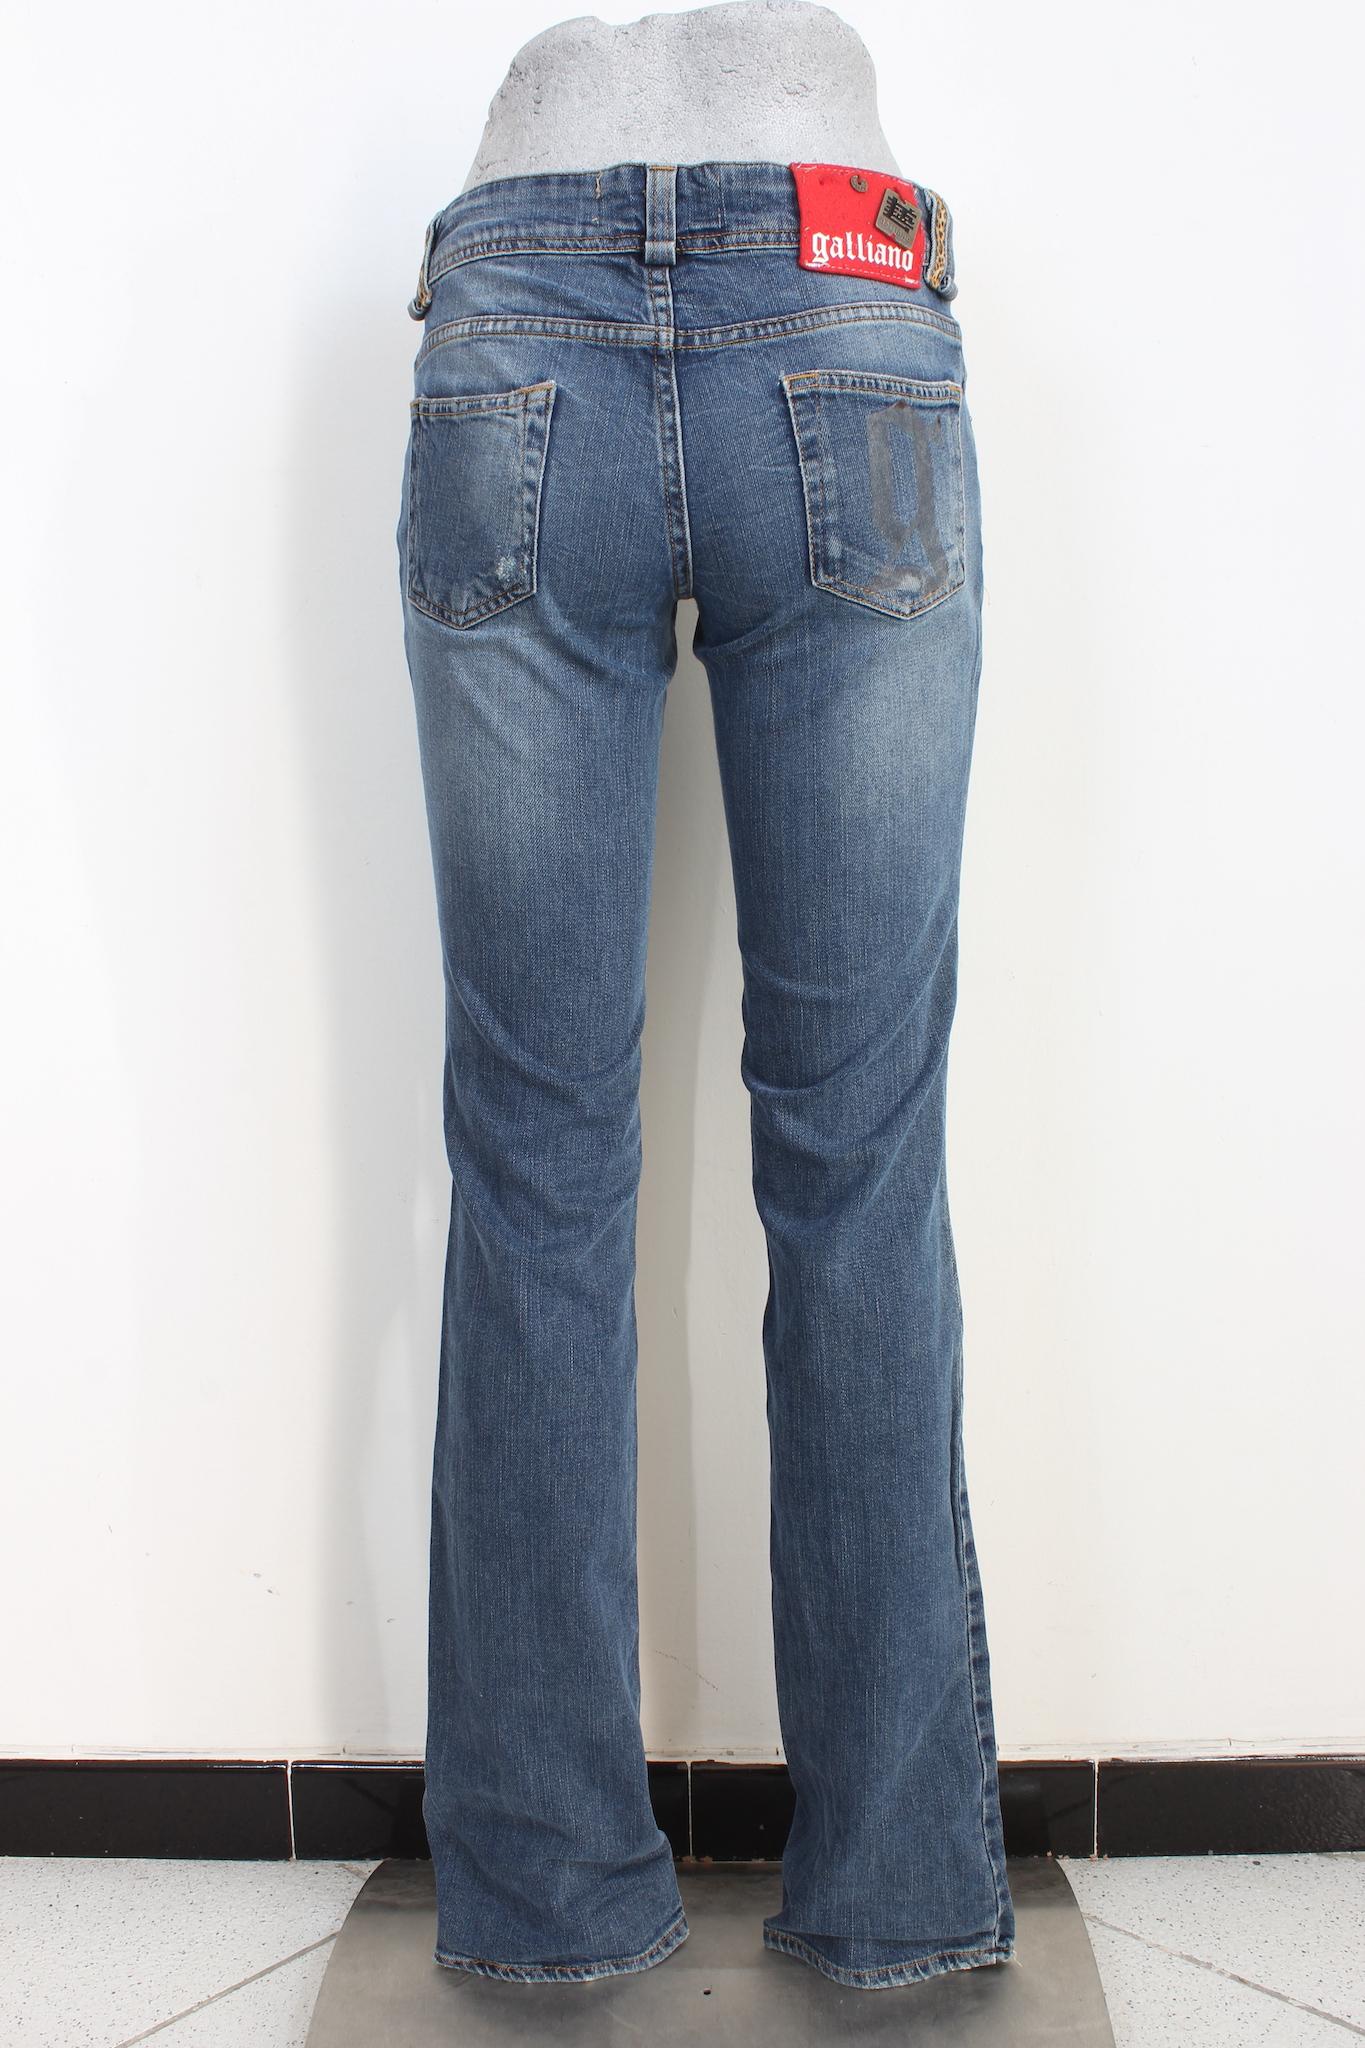 John Galliano Blue Straight Jeans Vintage 2000s In Excellent Condition For Sale In Brindisi, Bt